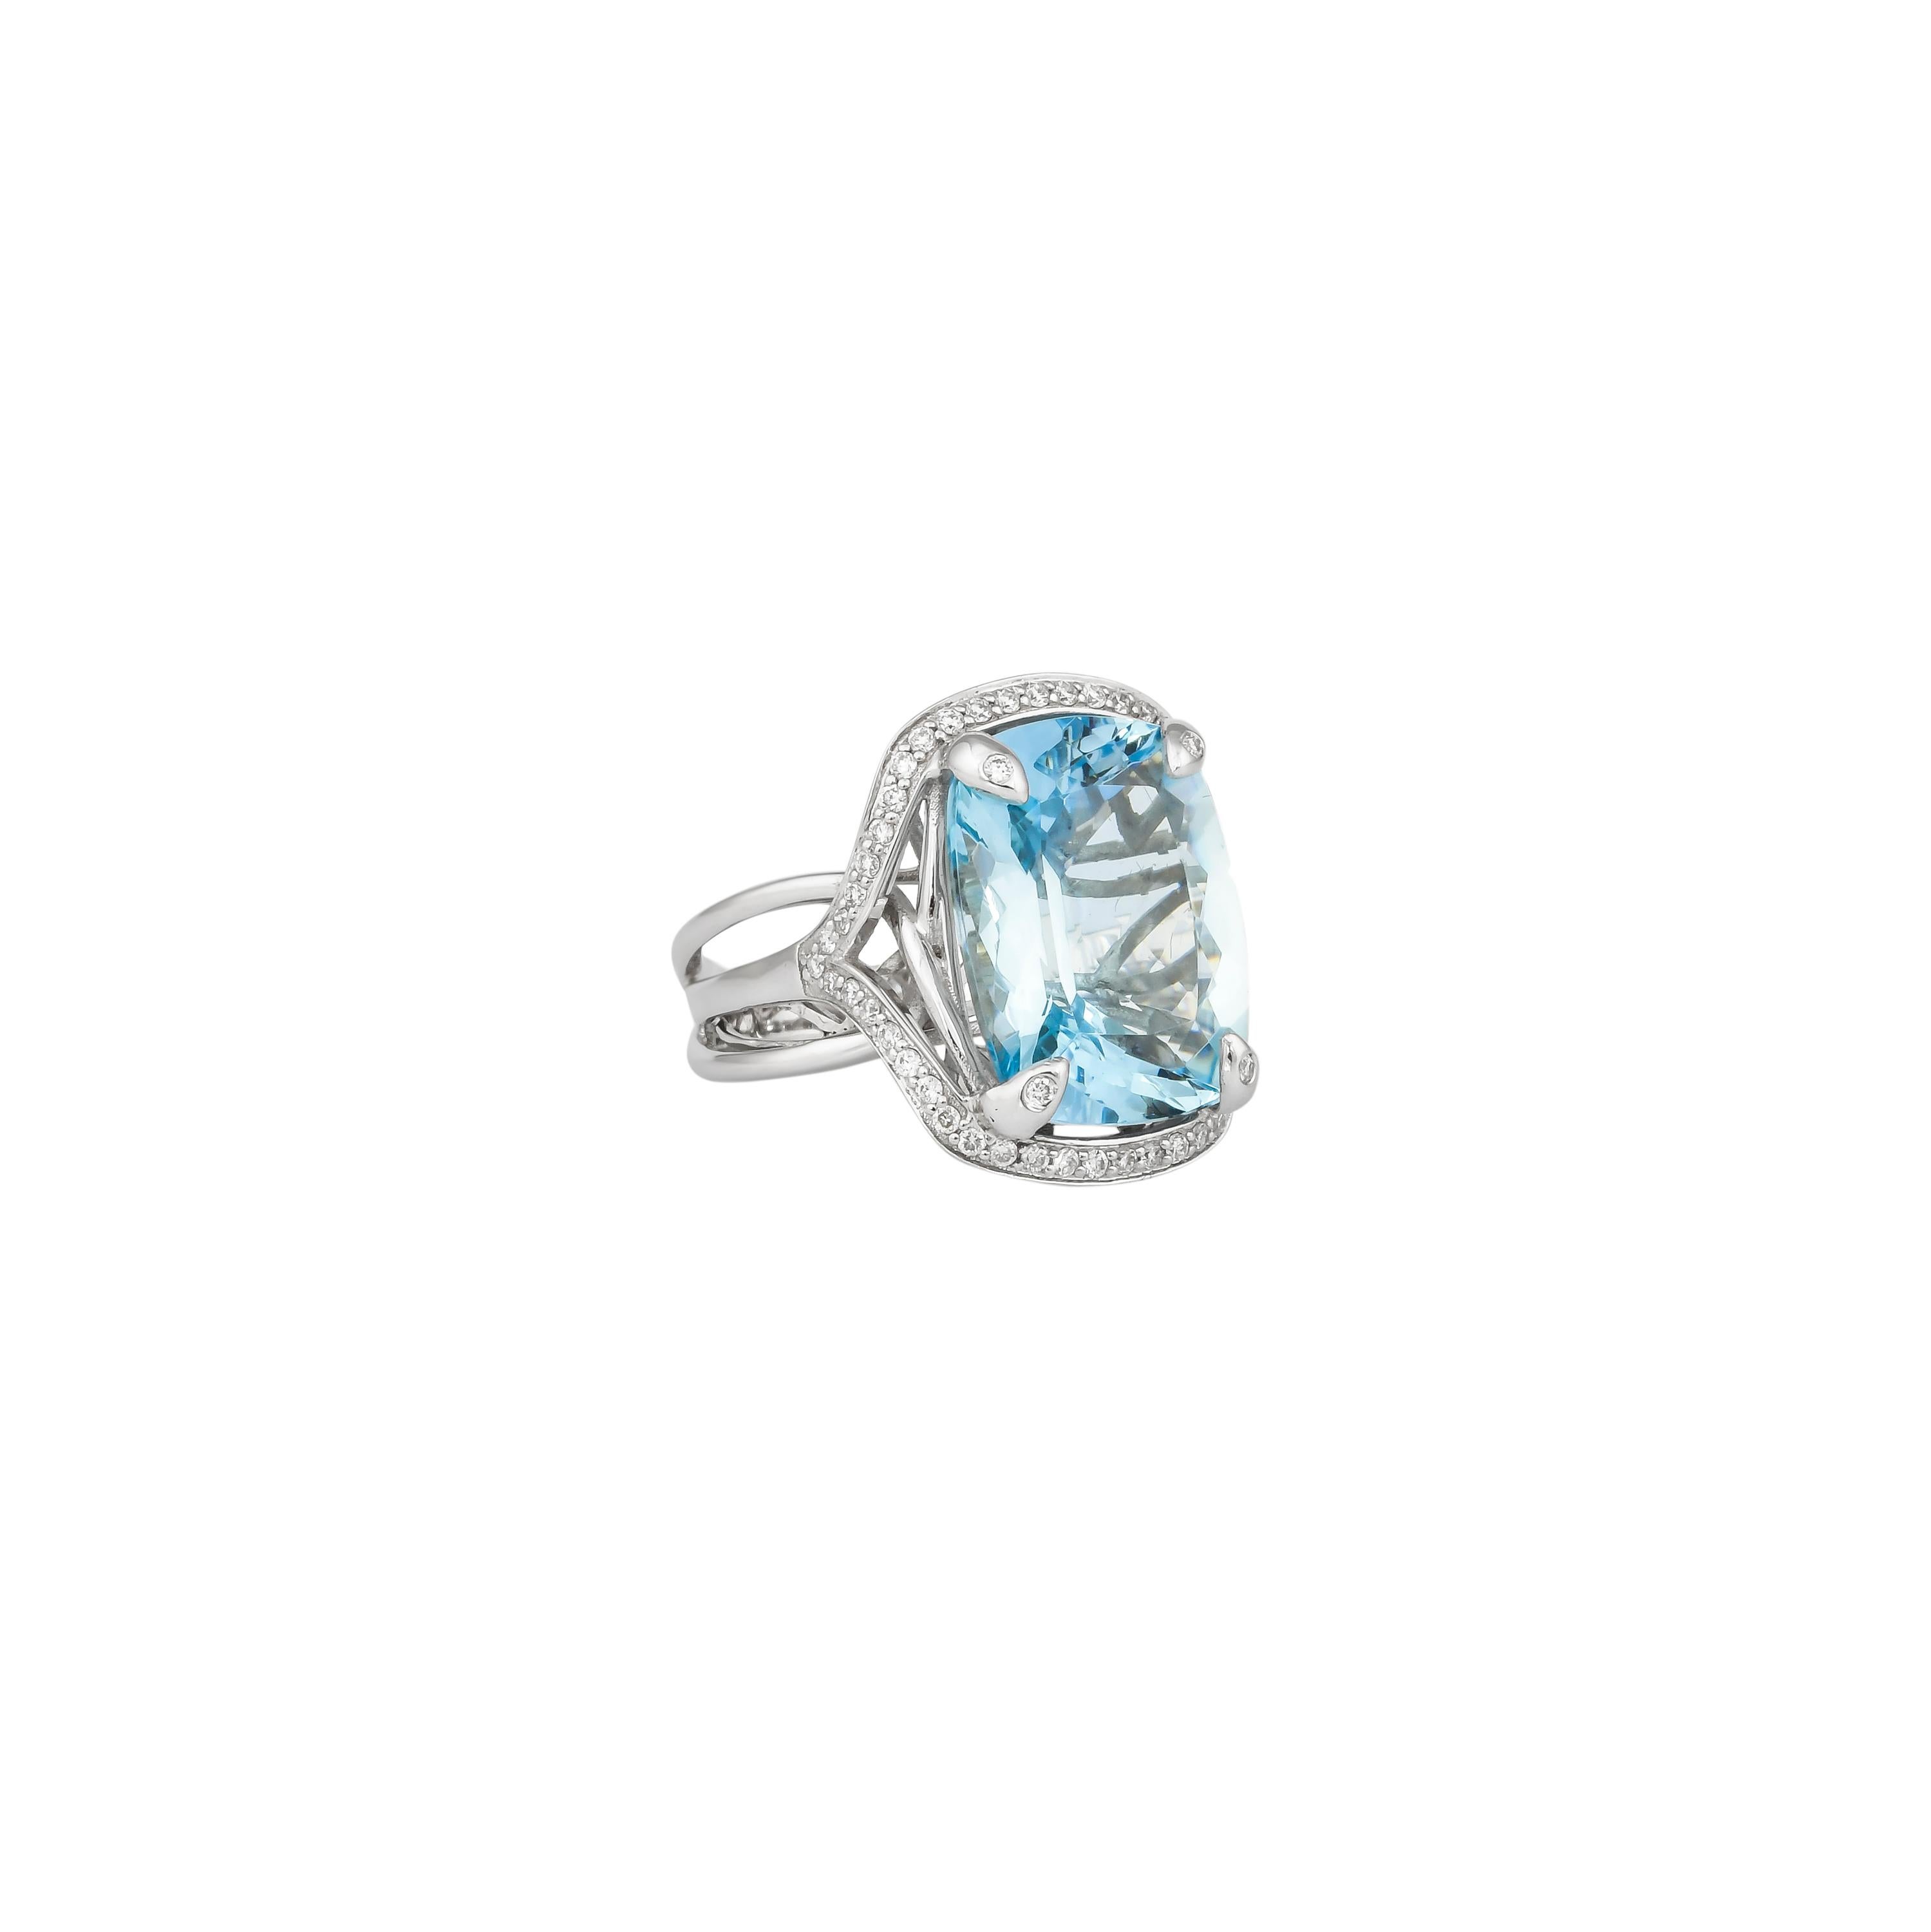 This collection features an array of aquamarines with an icy blue hue that is as cool as it gets! Accented with diamonds these rings are made in white and present a classic yet elegant look. 

Classic aquamarine ring in 18K white gold with diamonds.